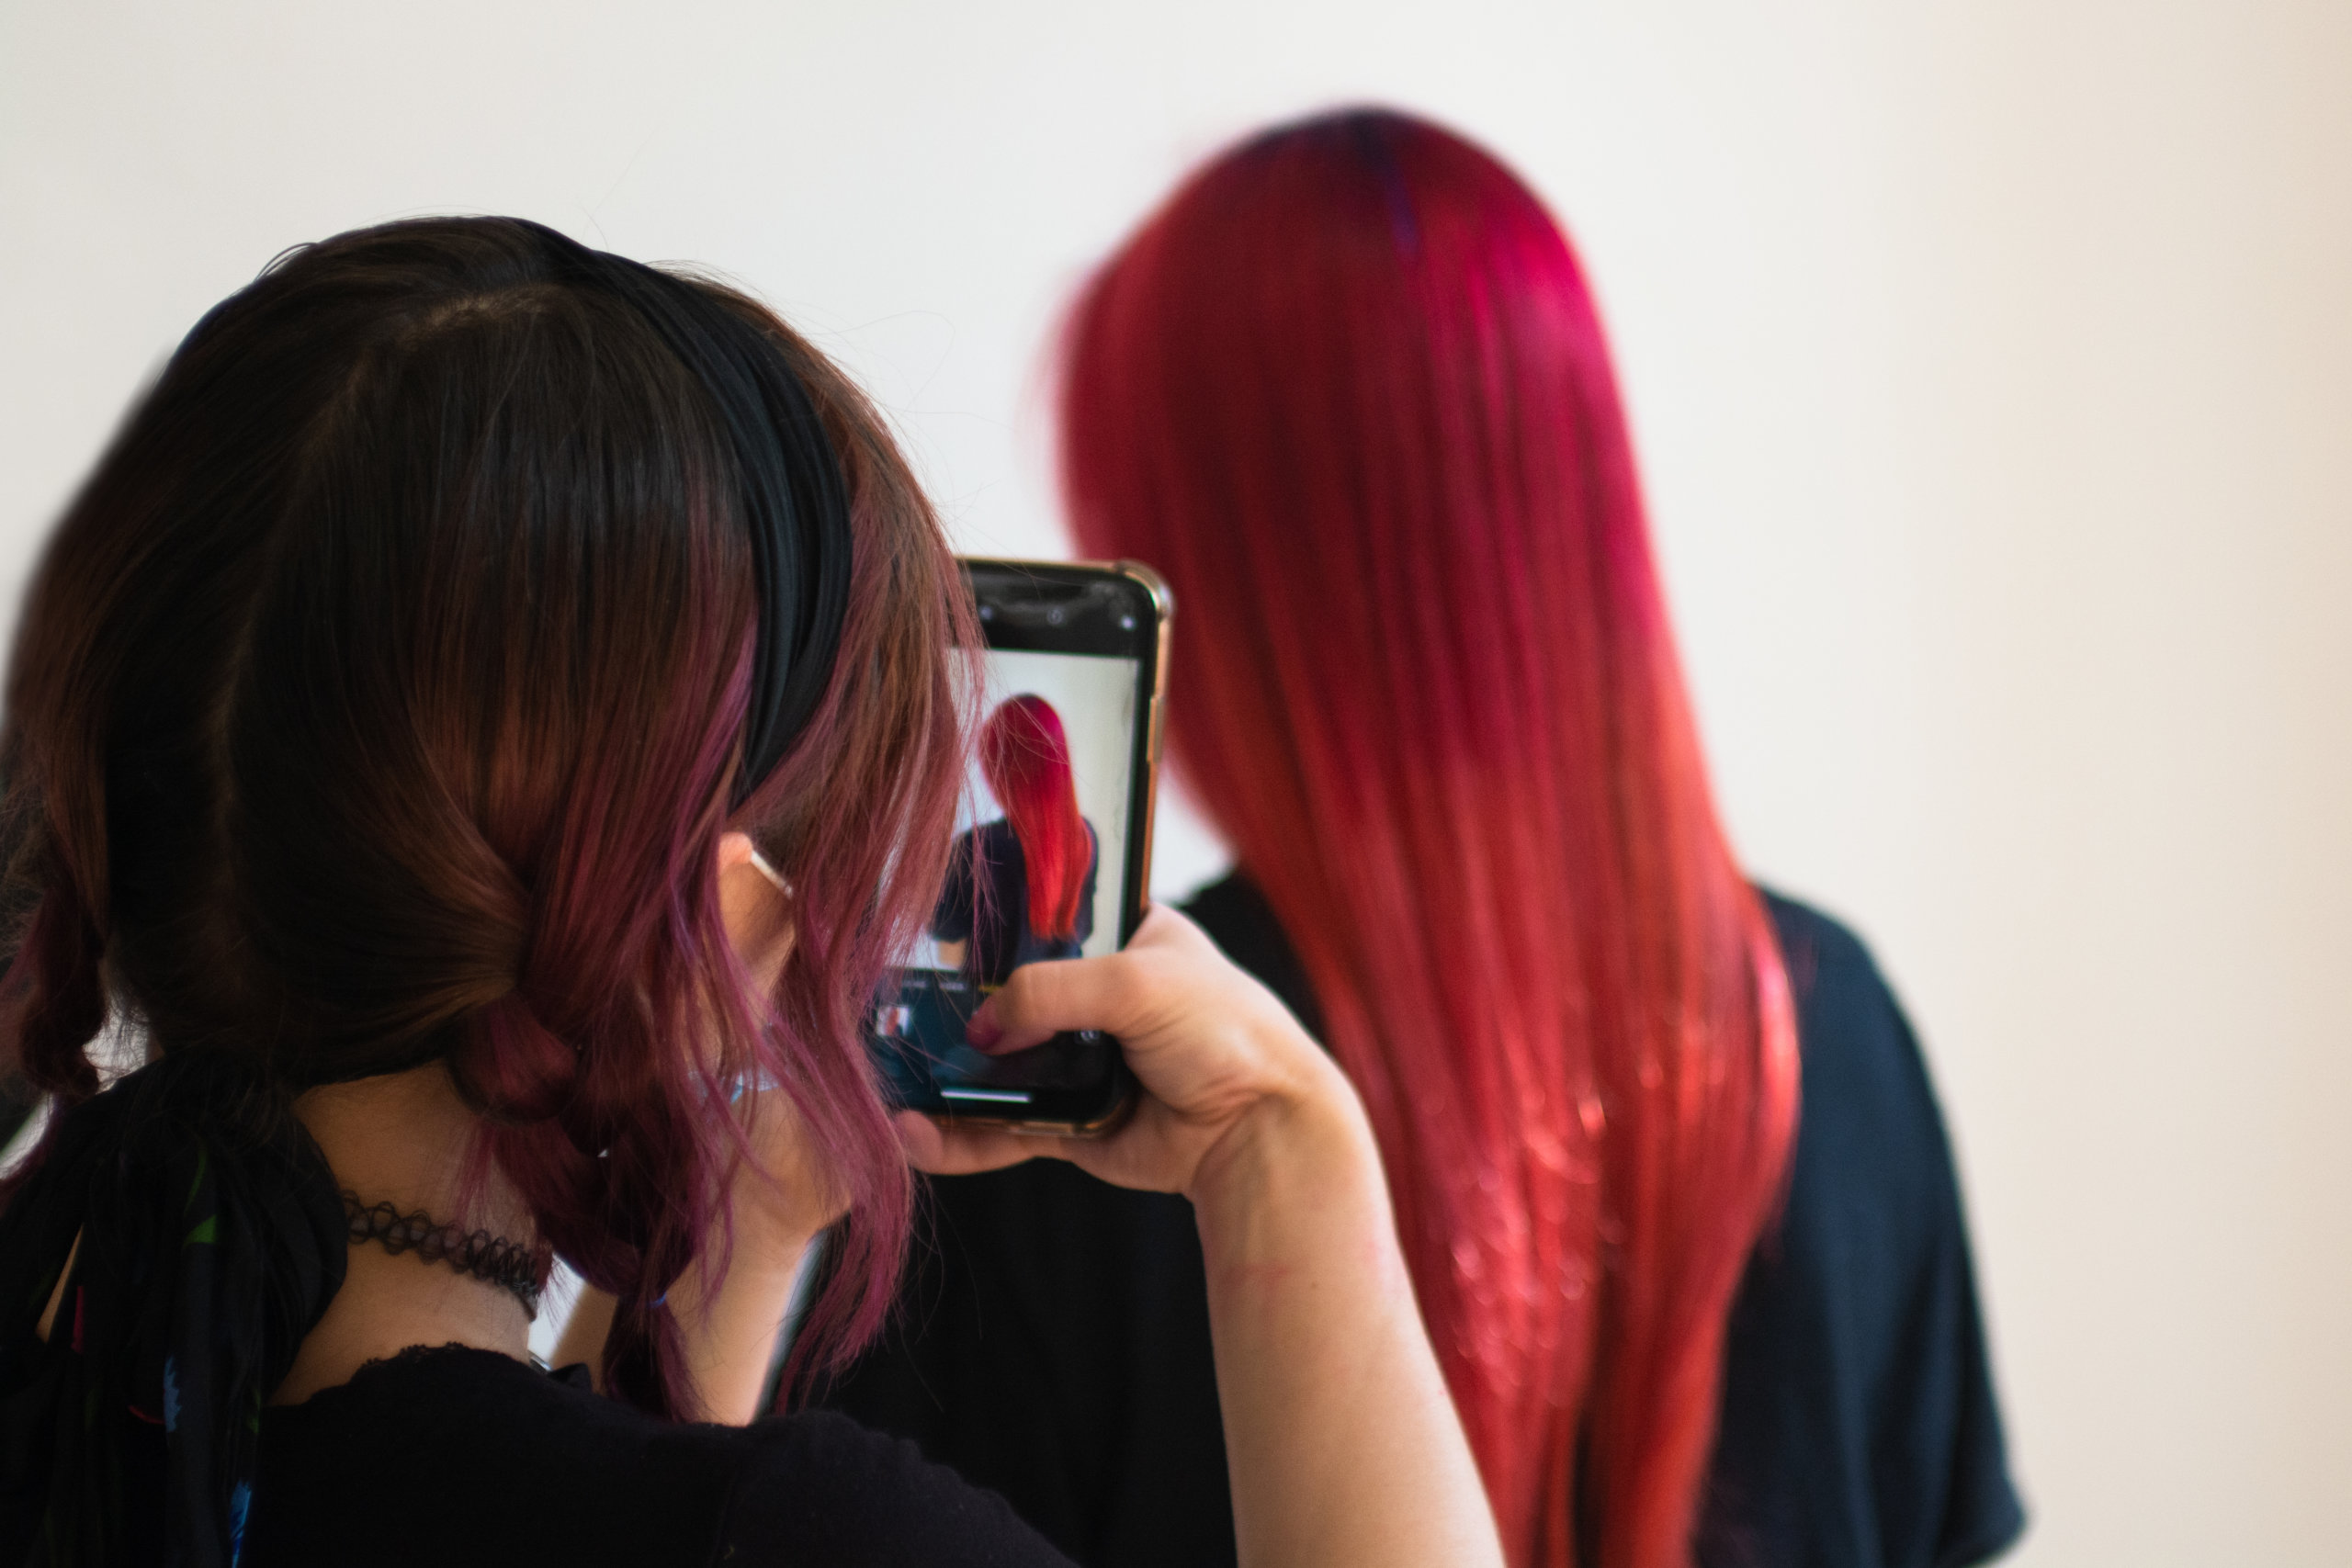 Hair stylist Natalie taking a photo of her vivid red haired client.